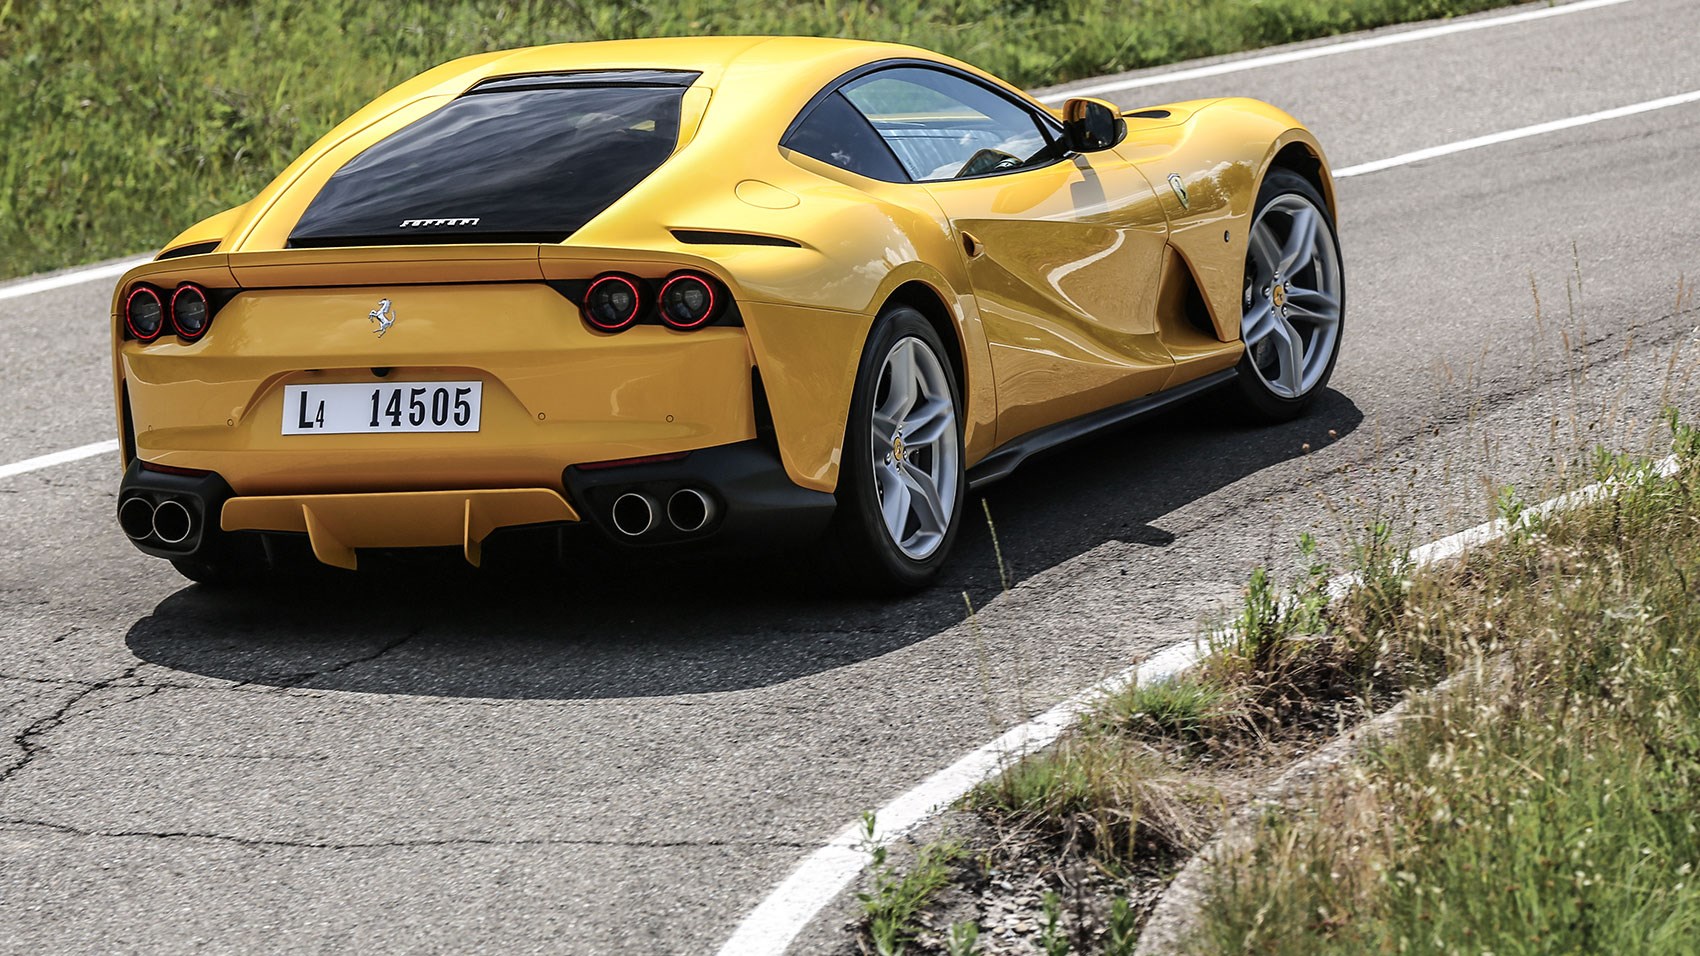 Ferrari 812 Superfast specs: the fastest front-engined V12 money can buy